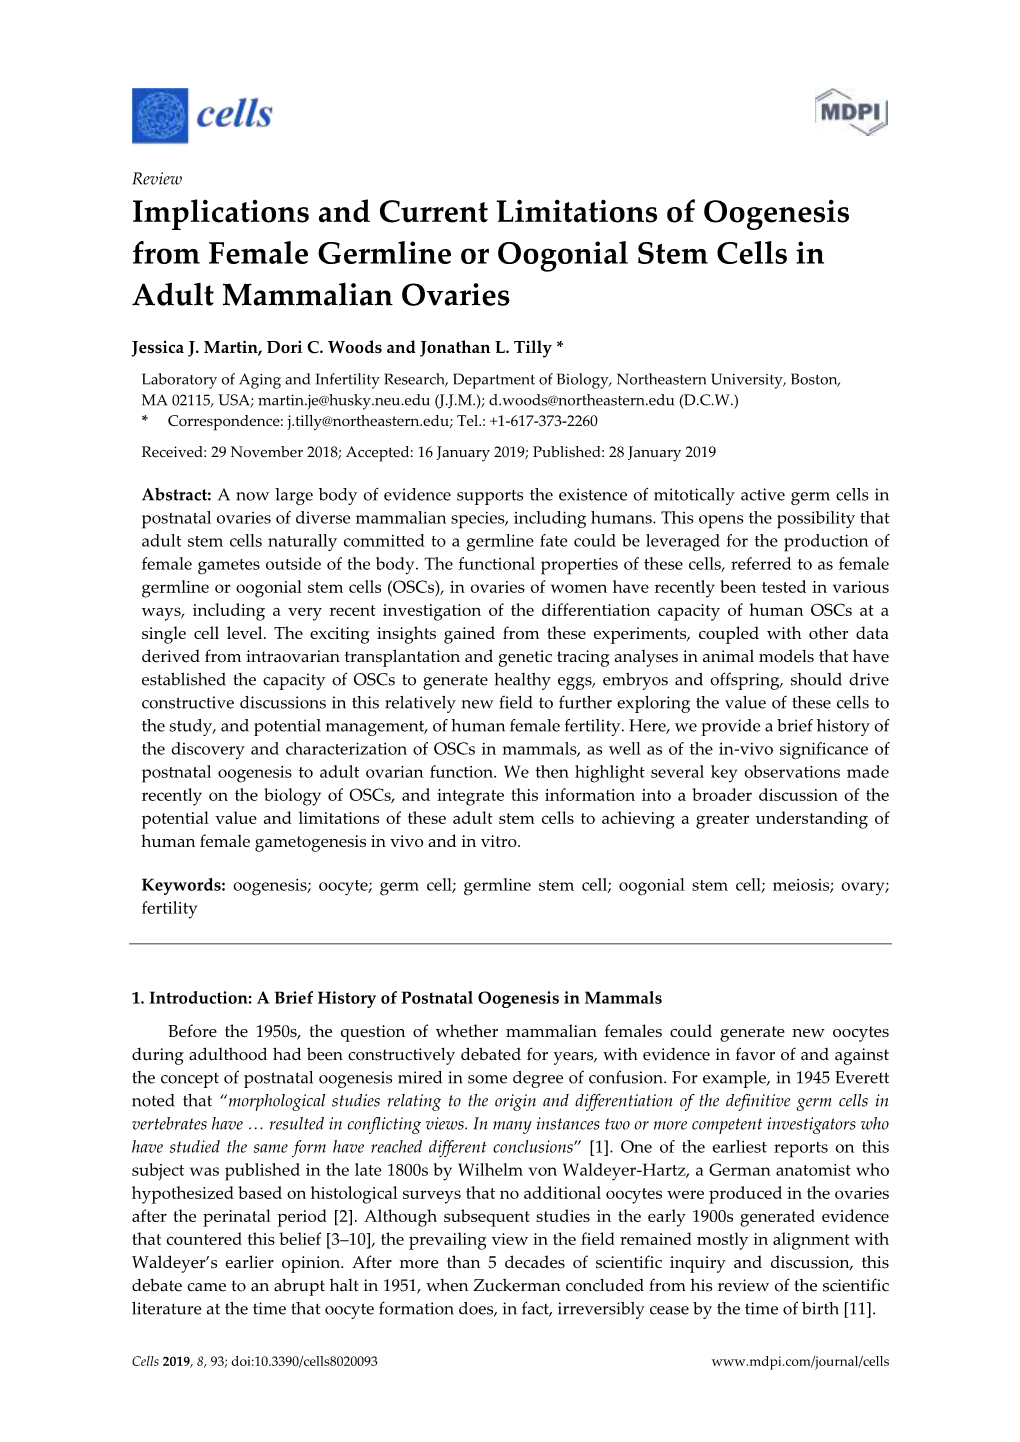 Implications and Current Limitations of Oogenesis from Female Germline Or Oogonial Stem Cells in Adult Mammalian Ovaries